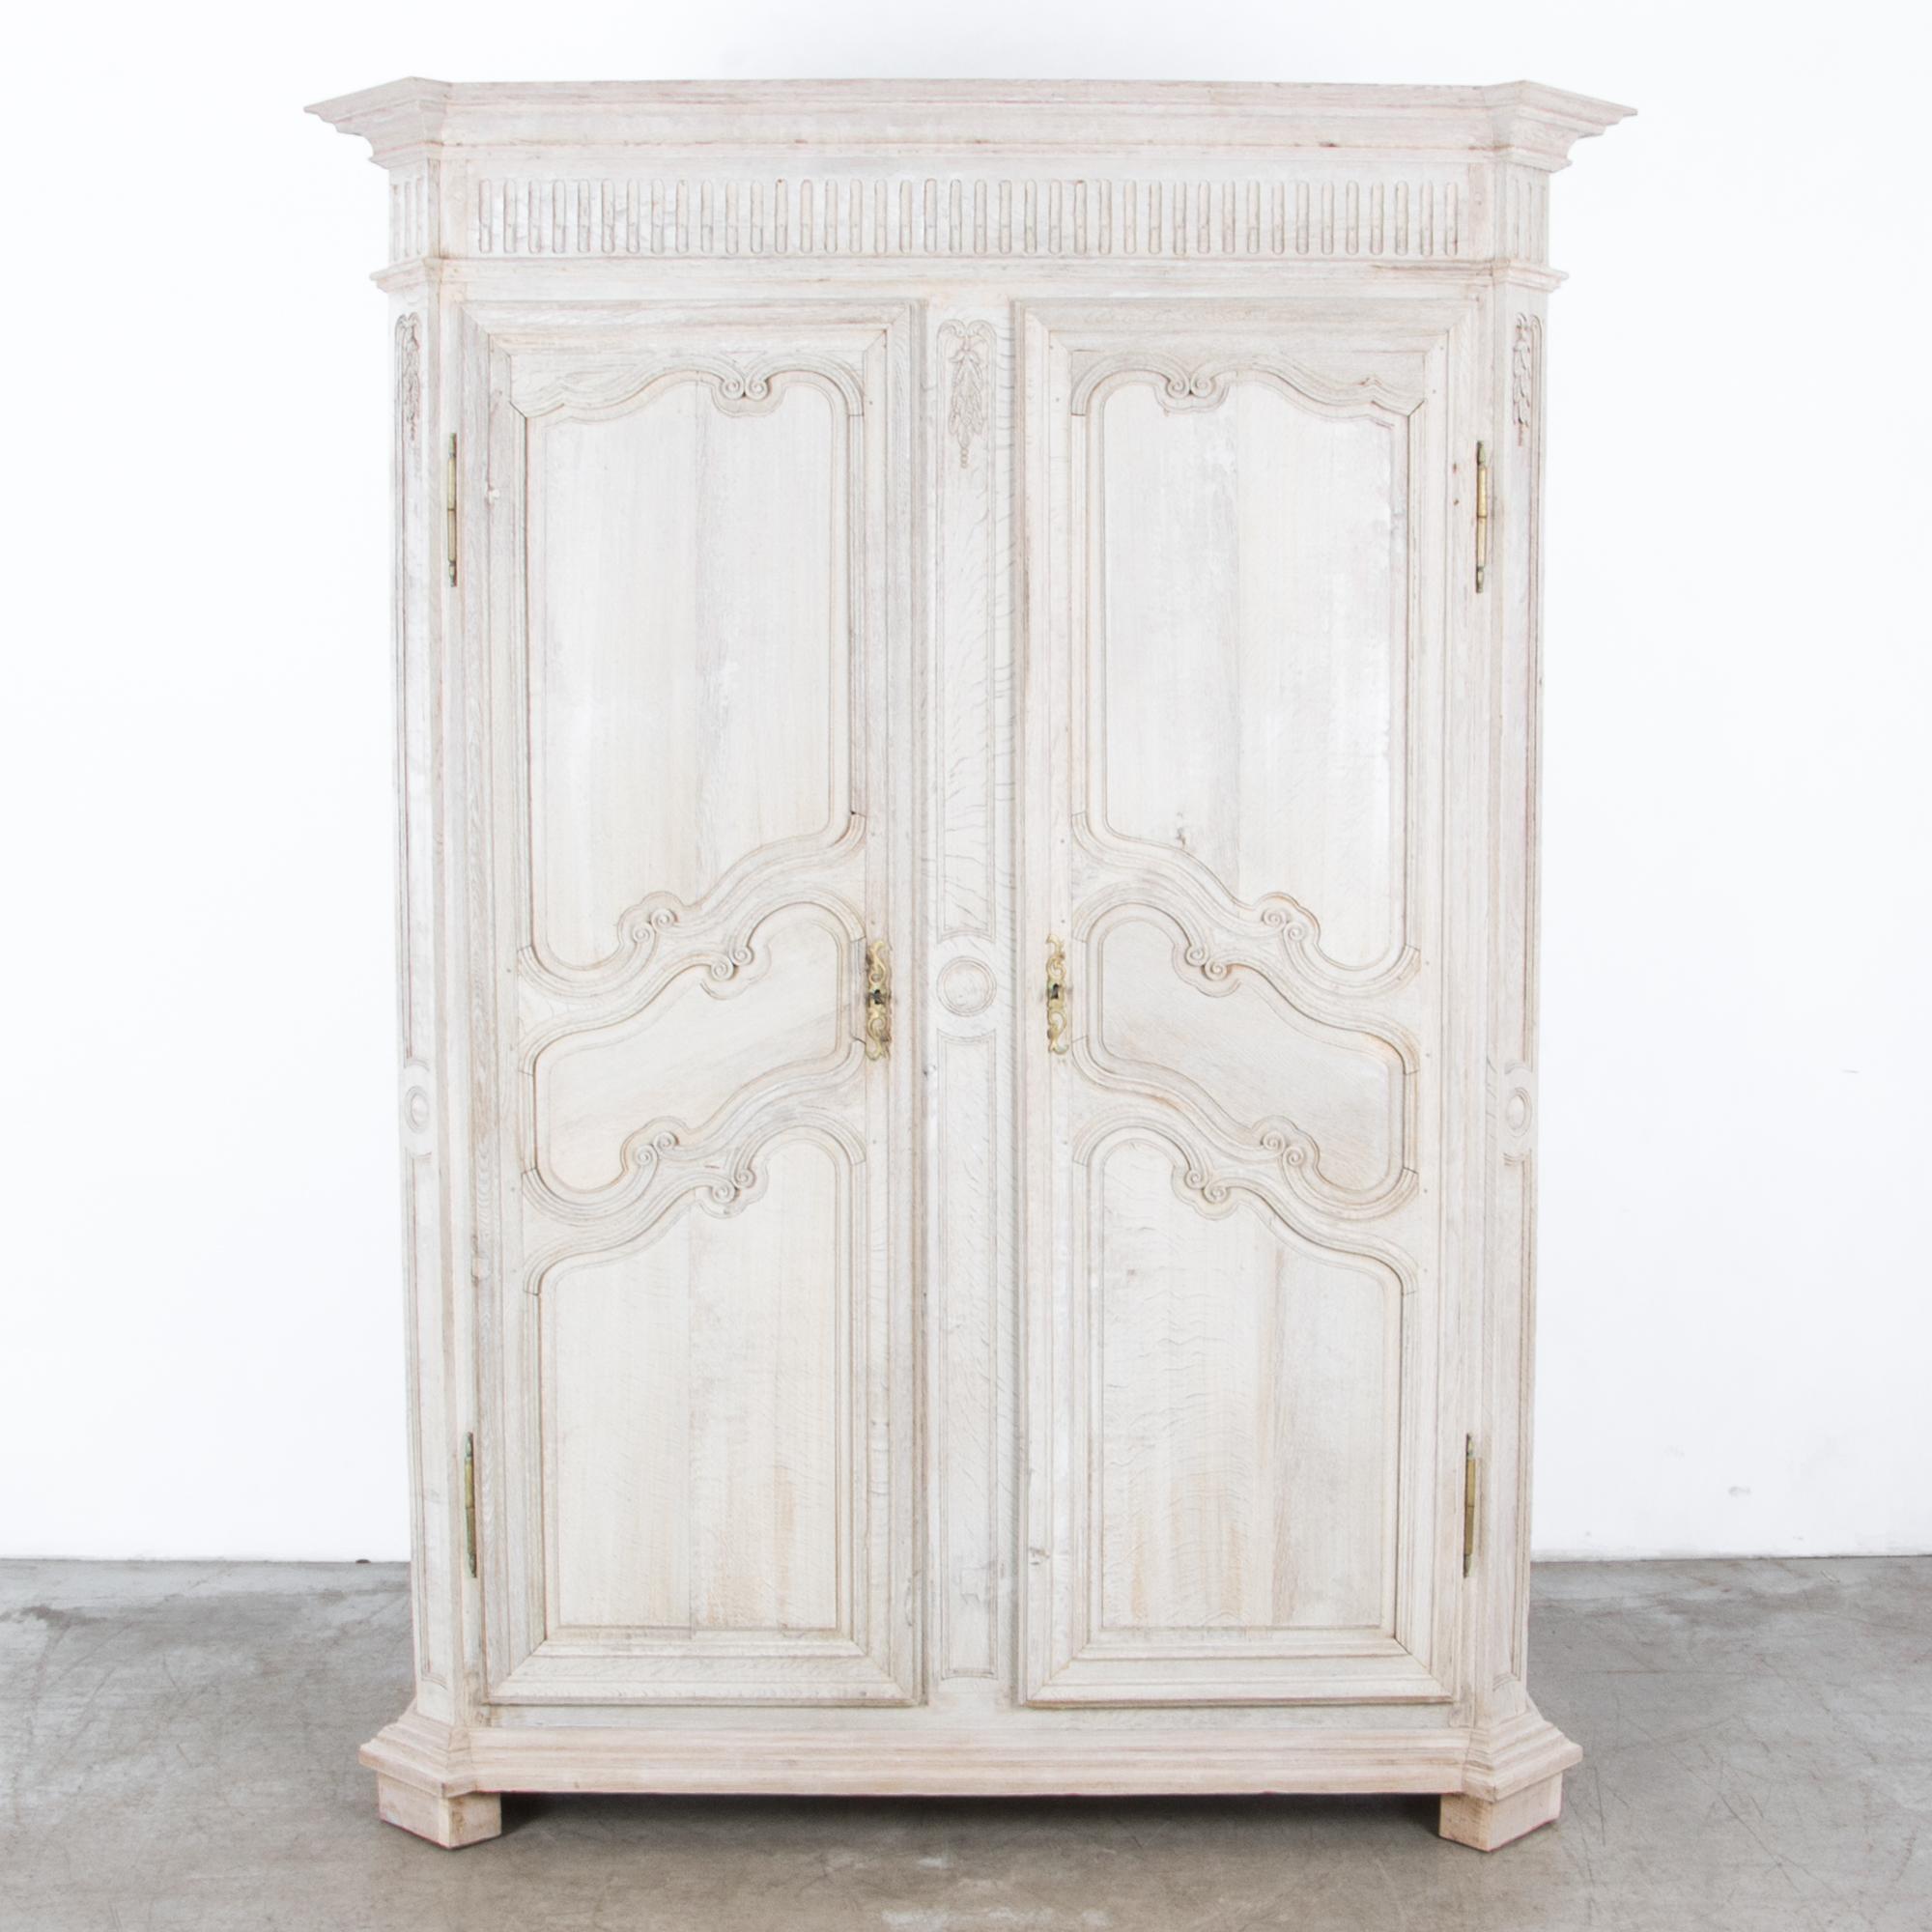 A Louis XVI influenced wardrobe from France, circa 1820. A spacious wide cabinet for wardrobe, pantry or other large storage. Time tested traditional craftsmanship in old growth European oak, with original brass hardware. A distinctive light finish